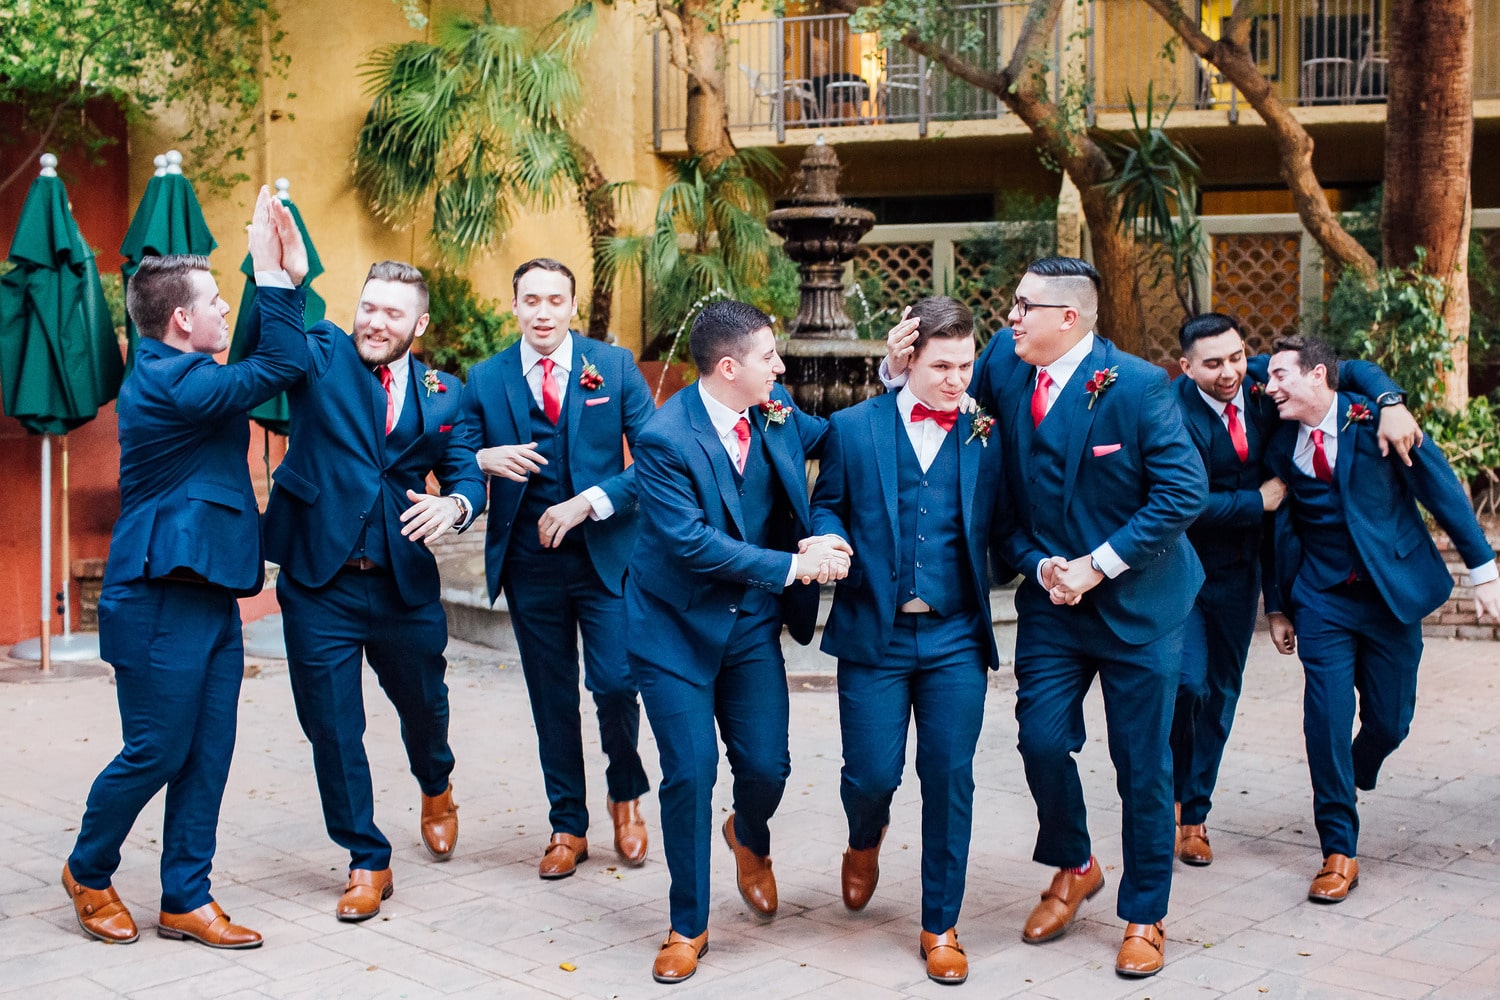 Groom and groomsmen in navy wedding suits laughing and holding each other outside of a yellow building